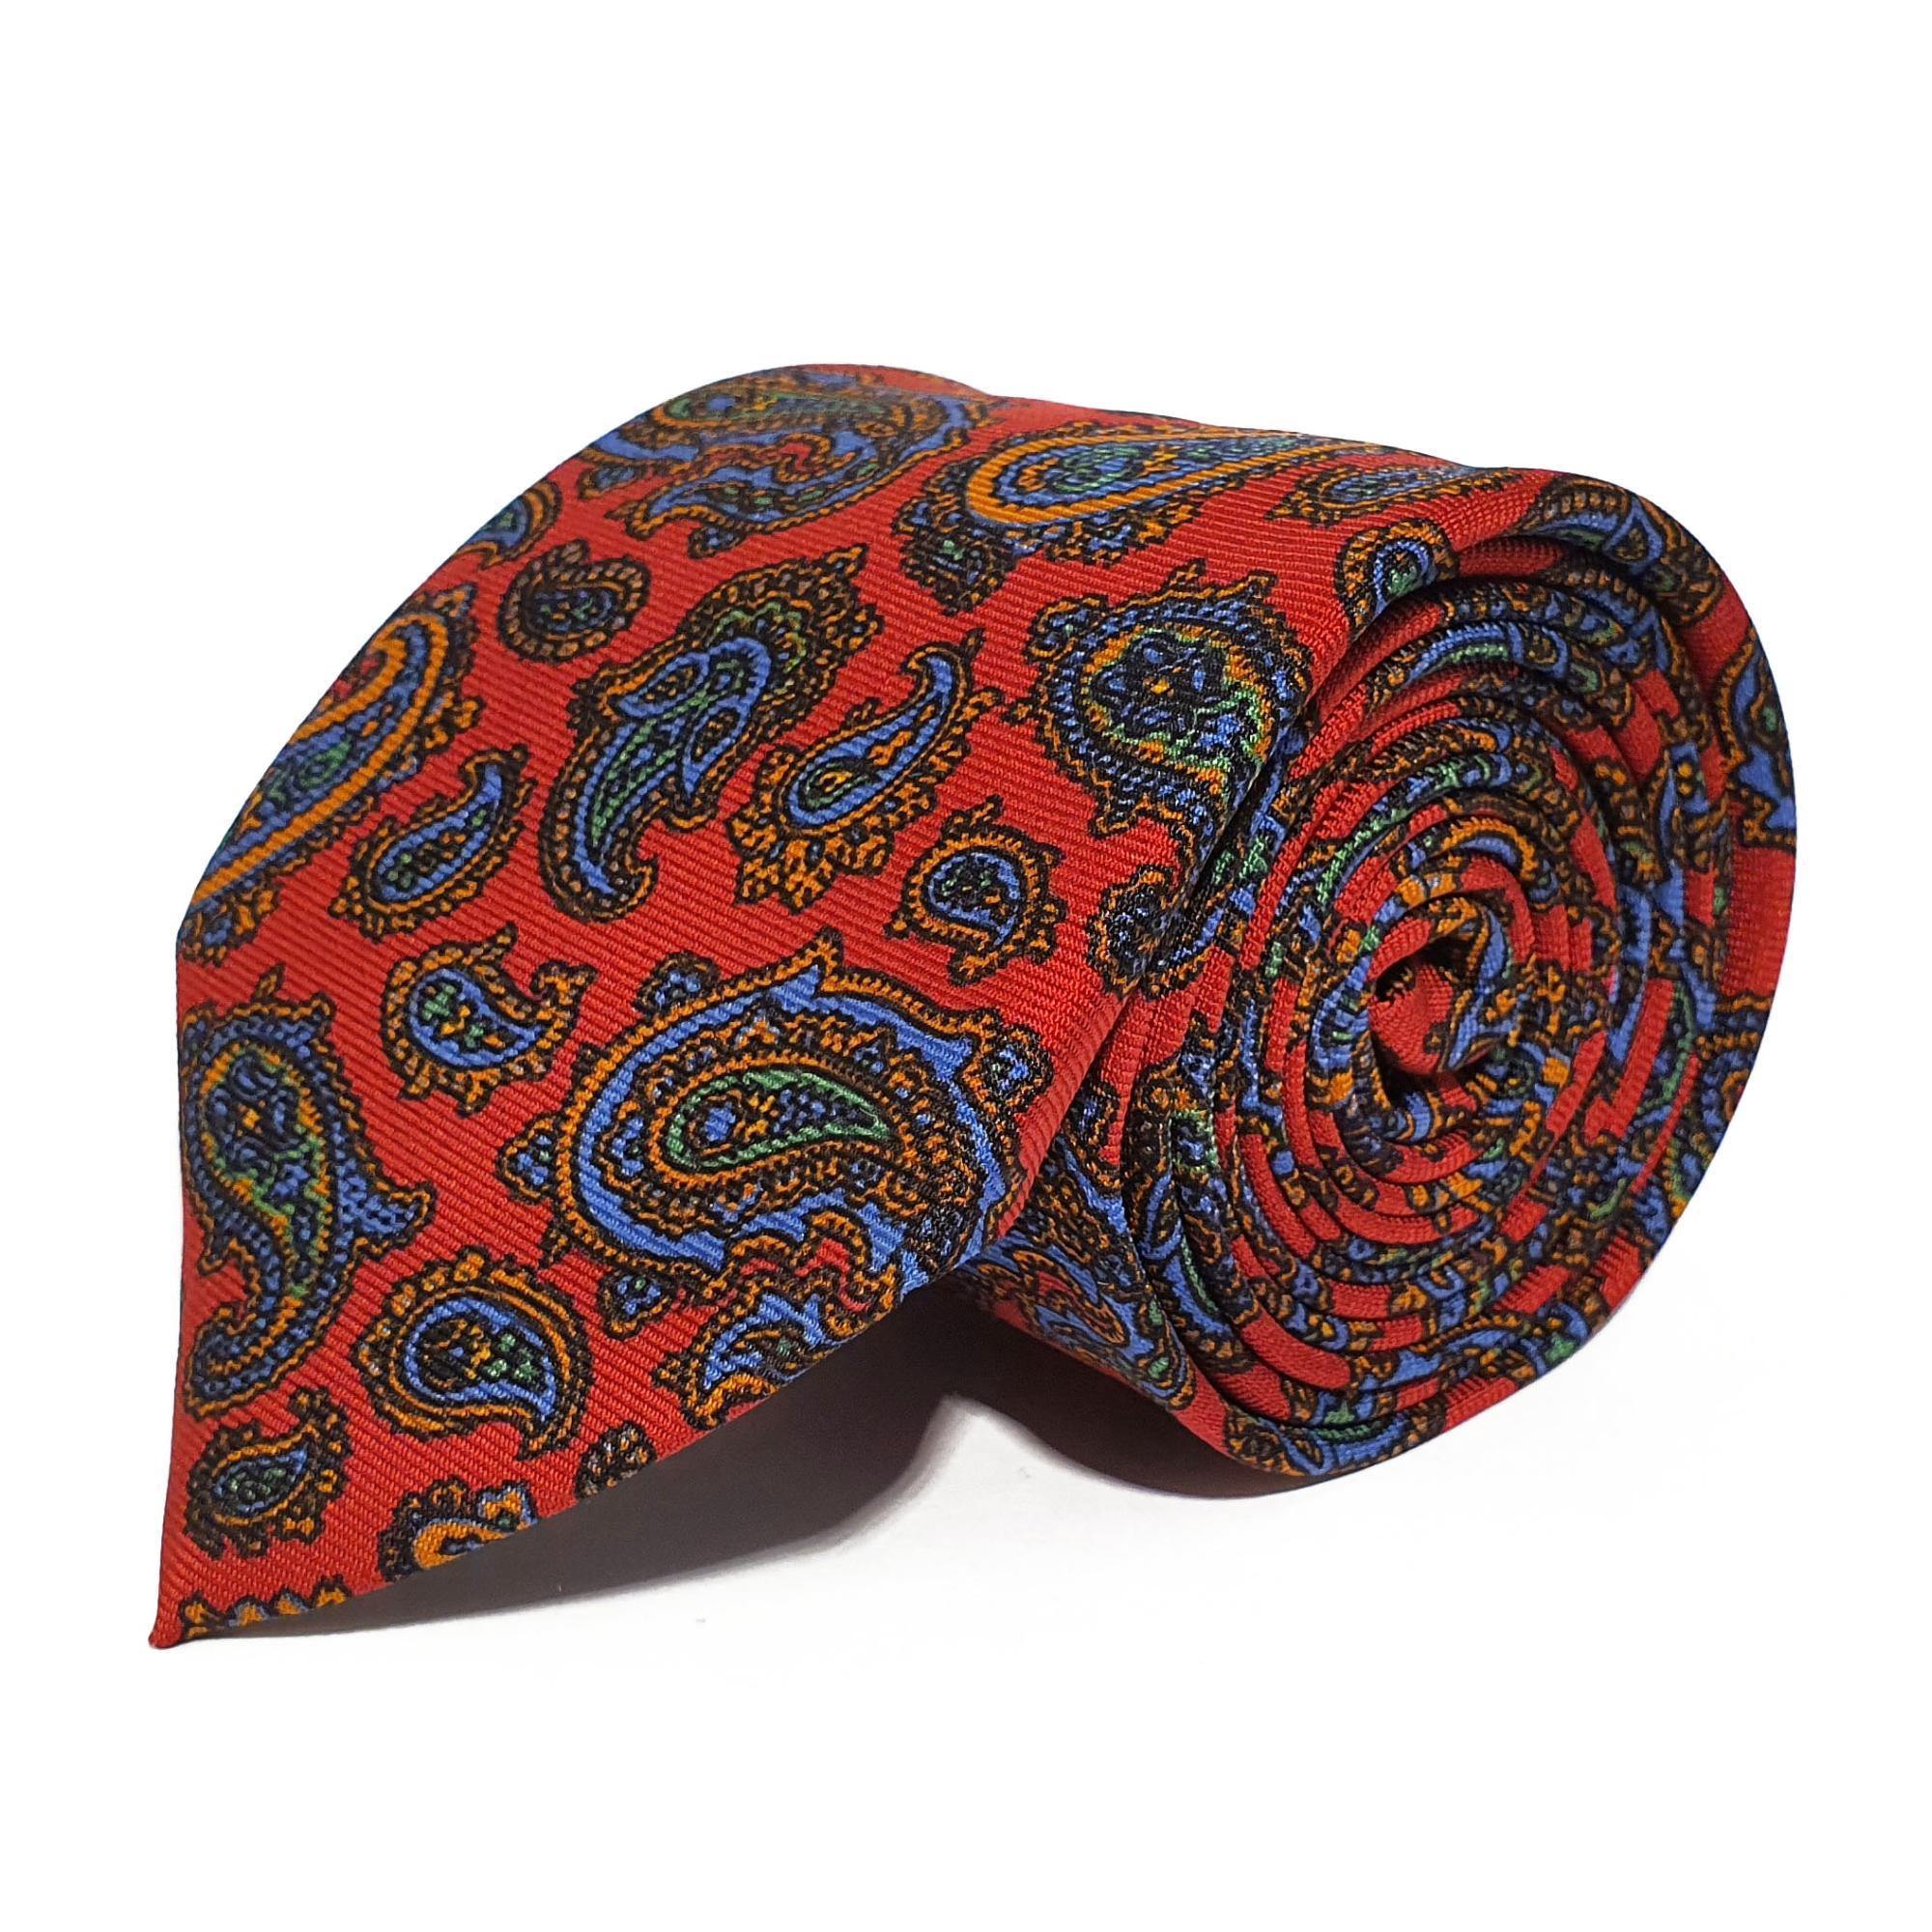 Red Paisley Printed Silk Tie Hand Finished - British Made